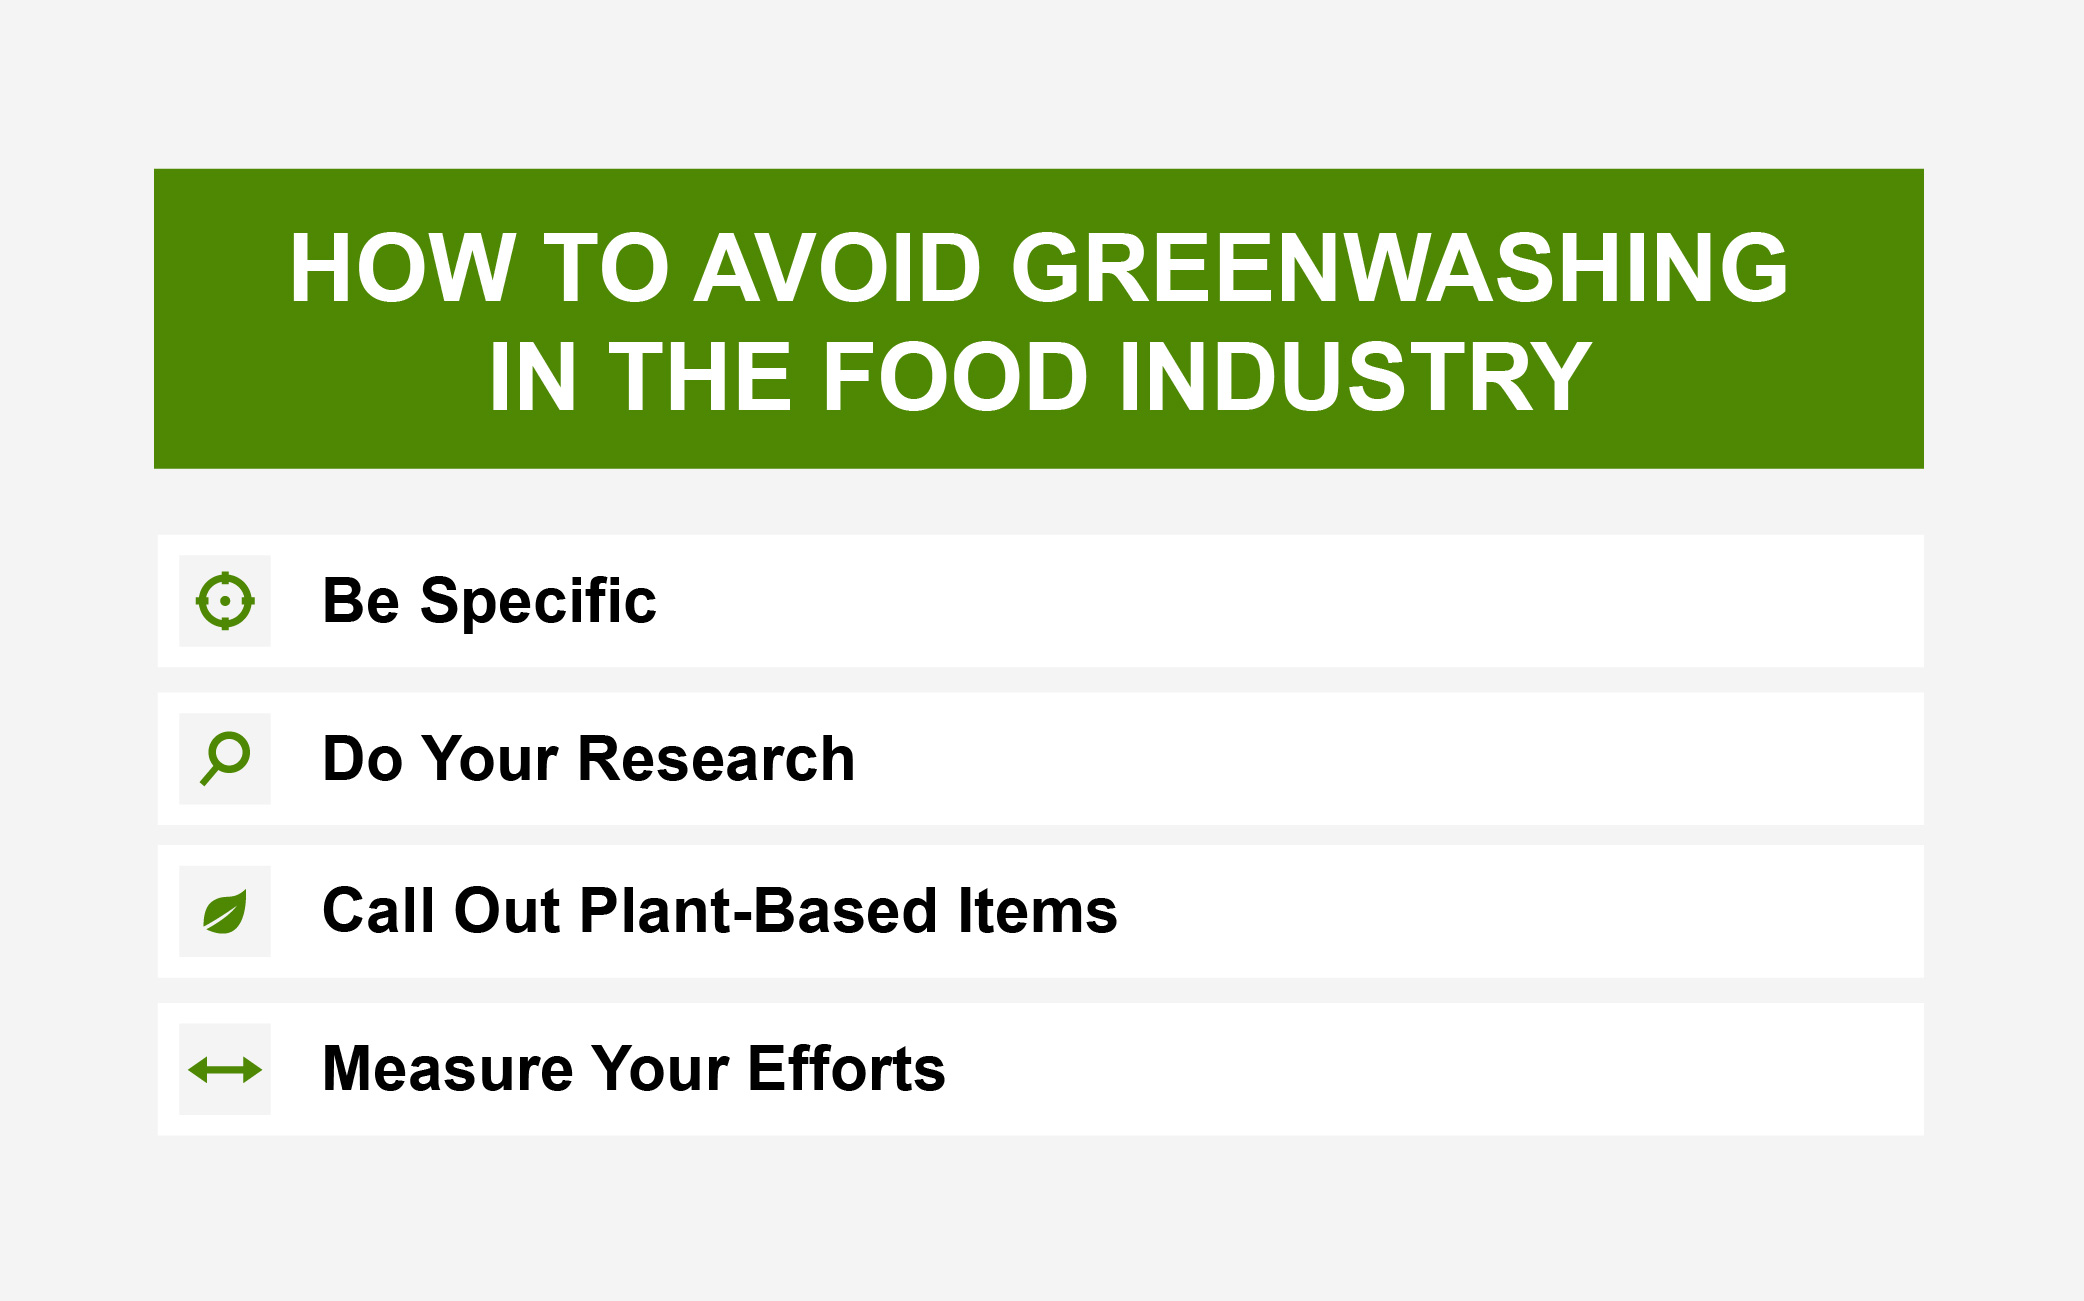 Avoid greenwashing in the food industry.